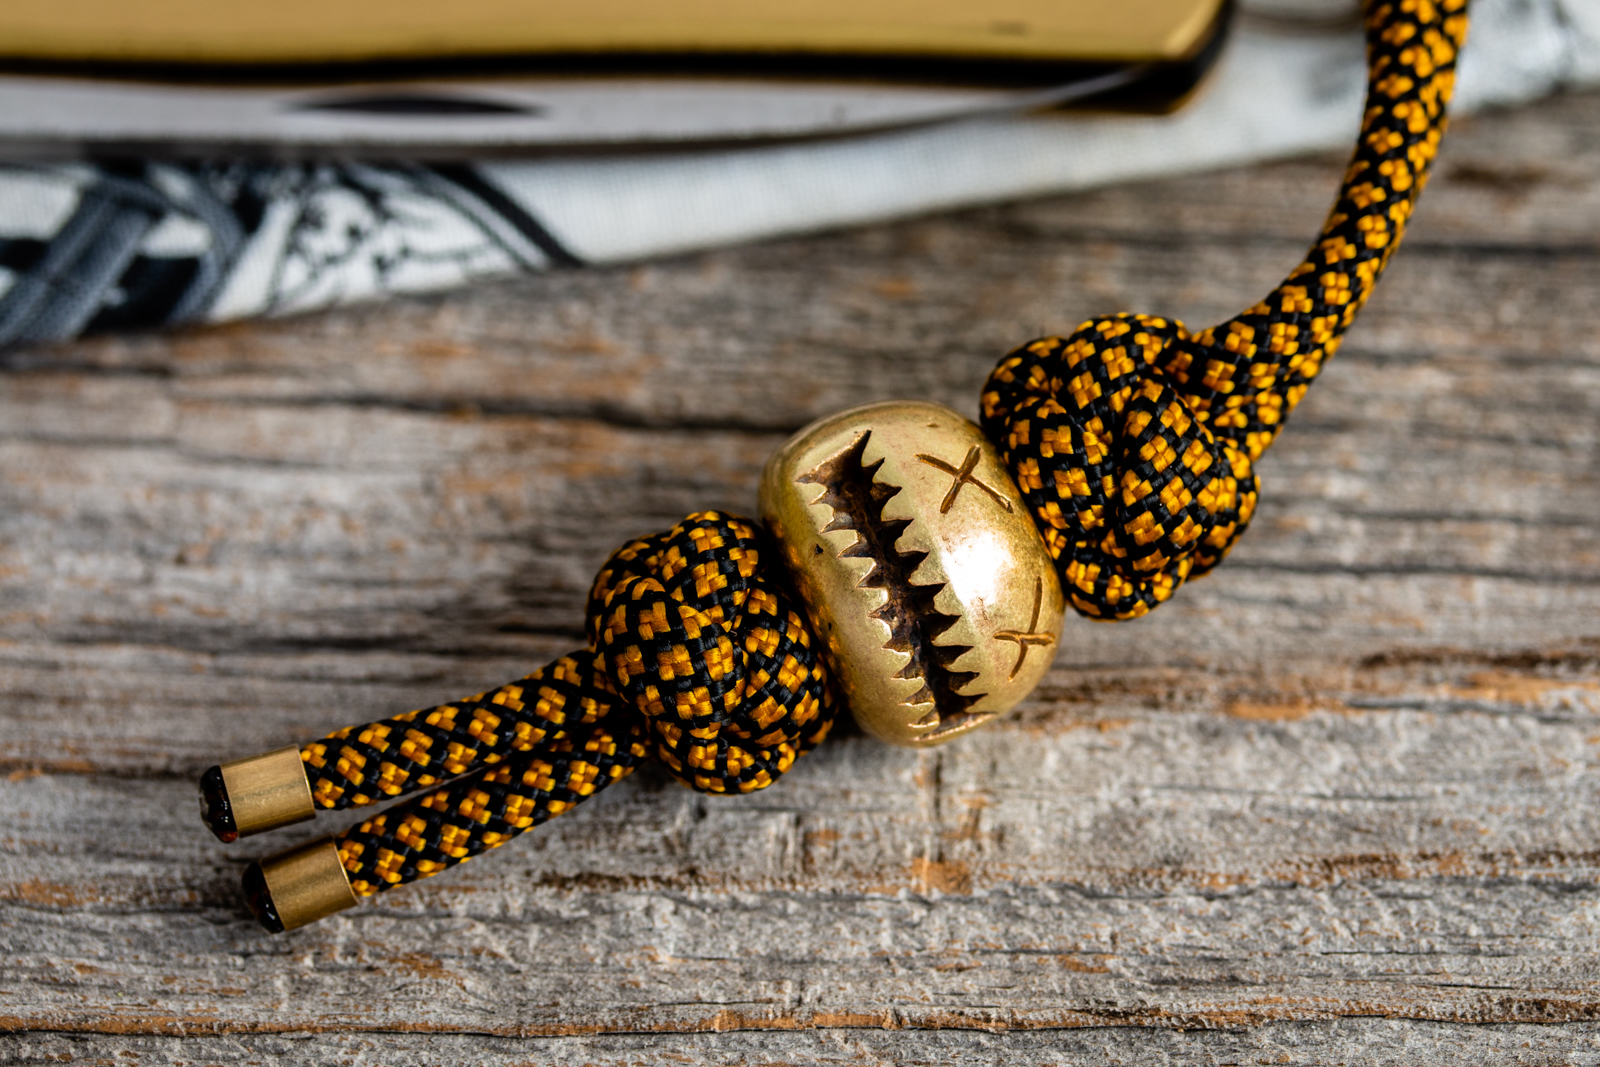 Details about   B-HOLE XB Bead • Lanyard Bead • EDC • Solid Brass Build • Limited 1x Bead 